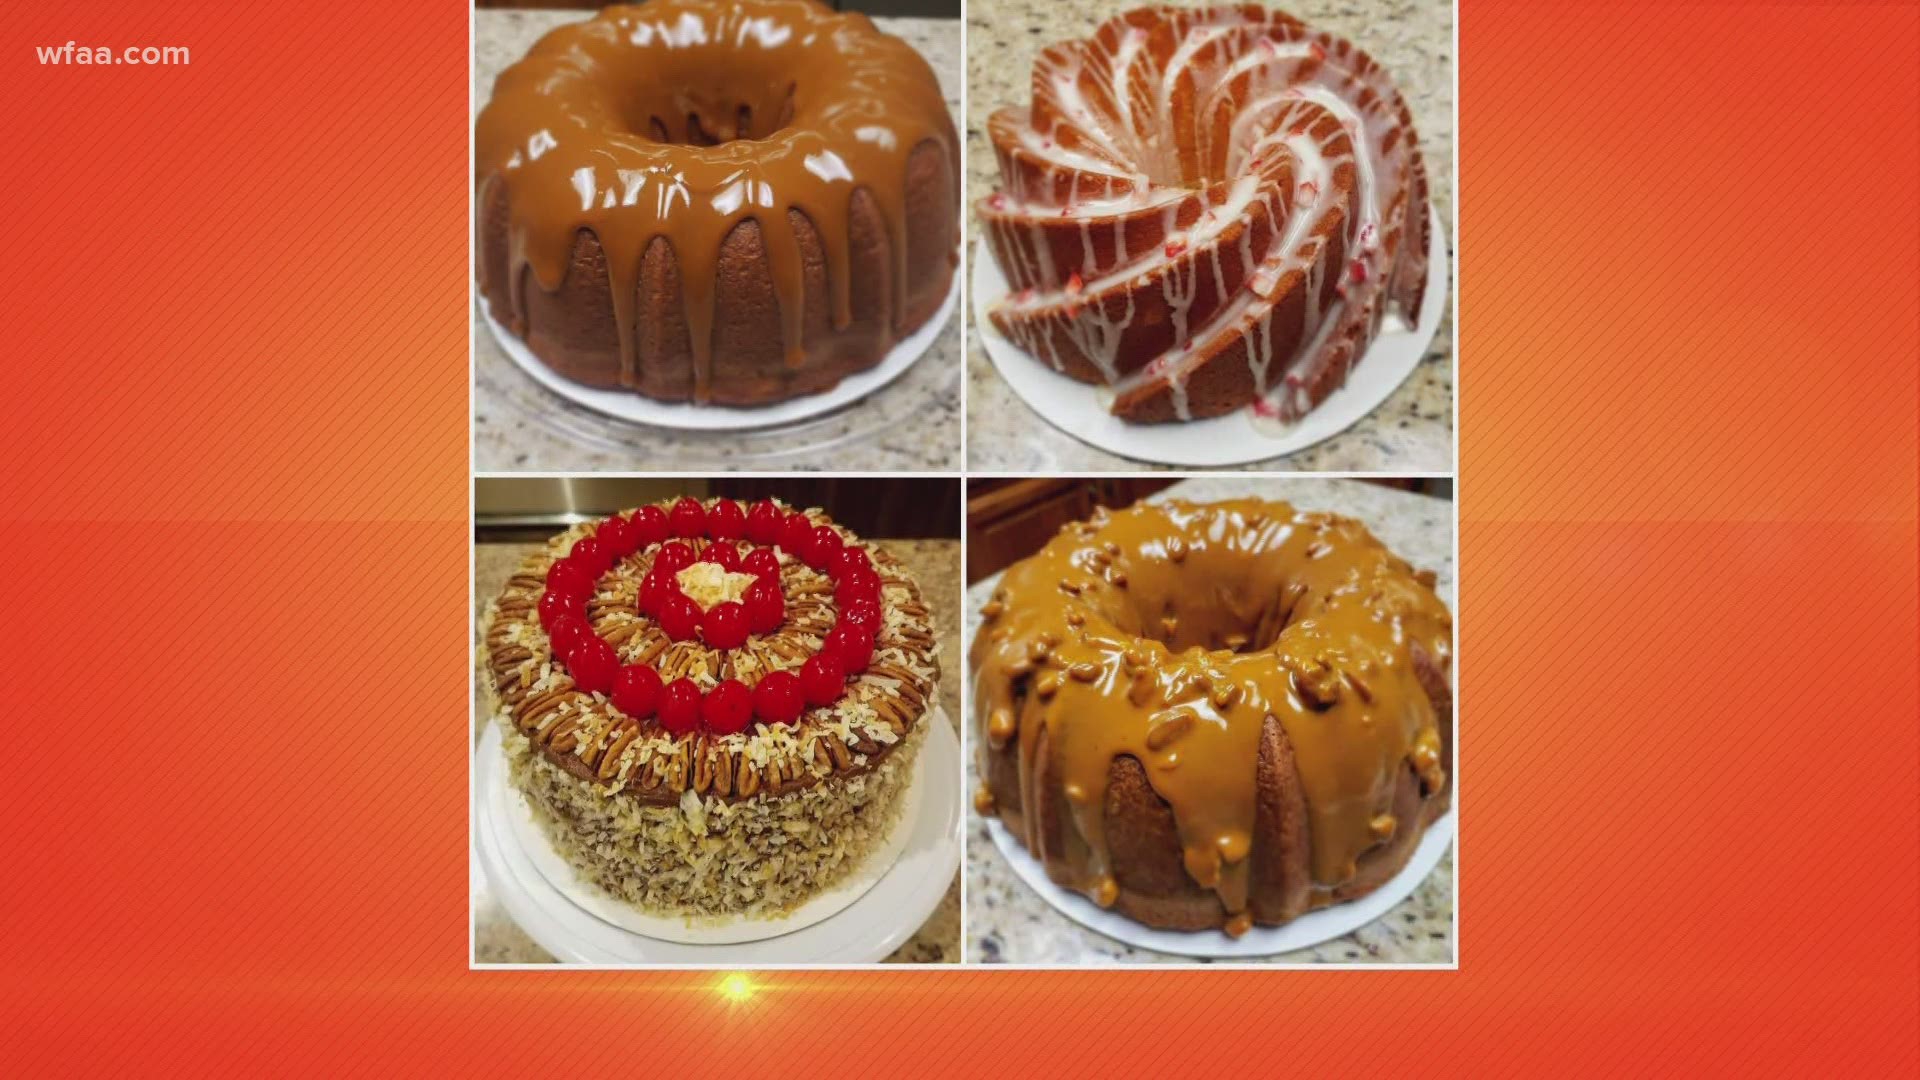 Yolanda shared these cake creations on our Reasons to Smile Facebook group.